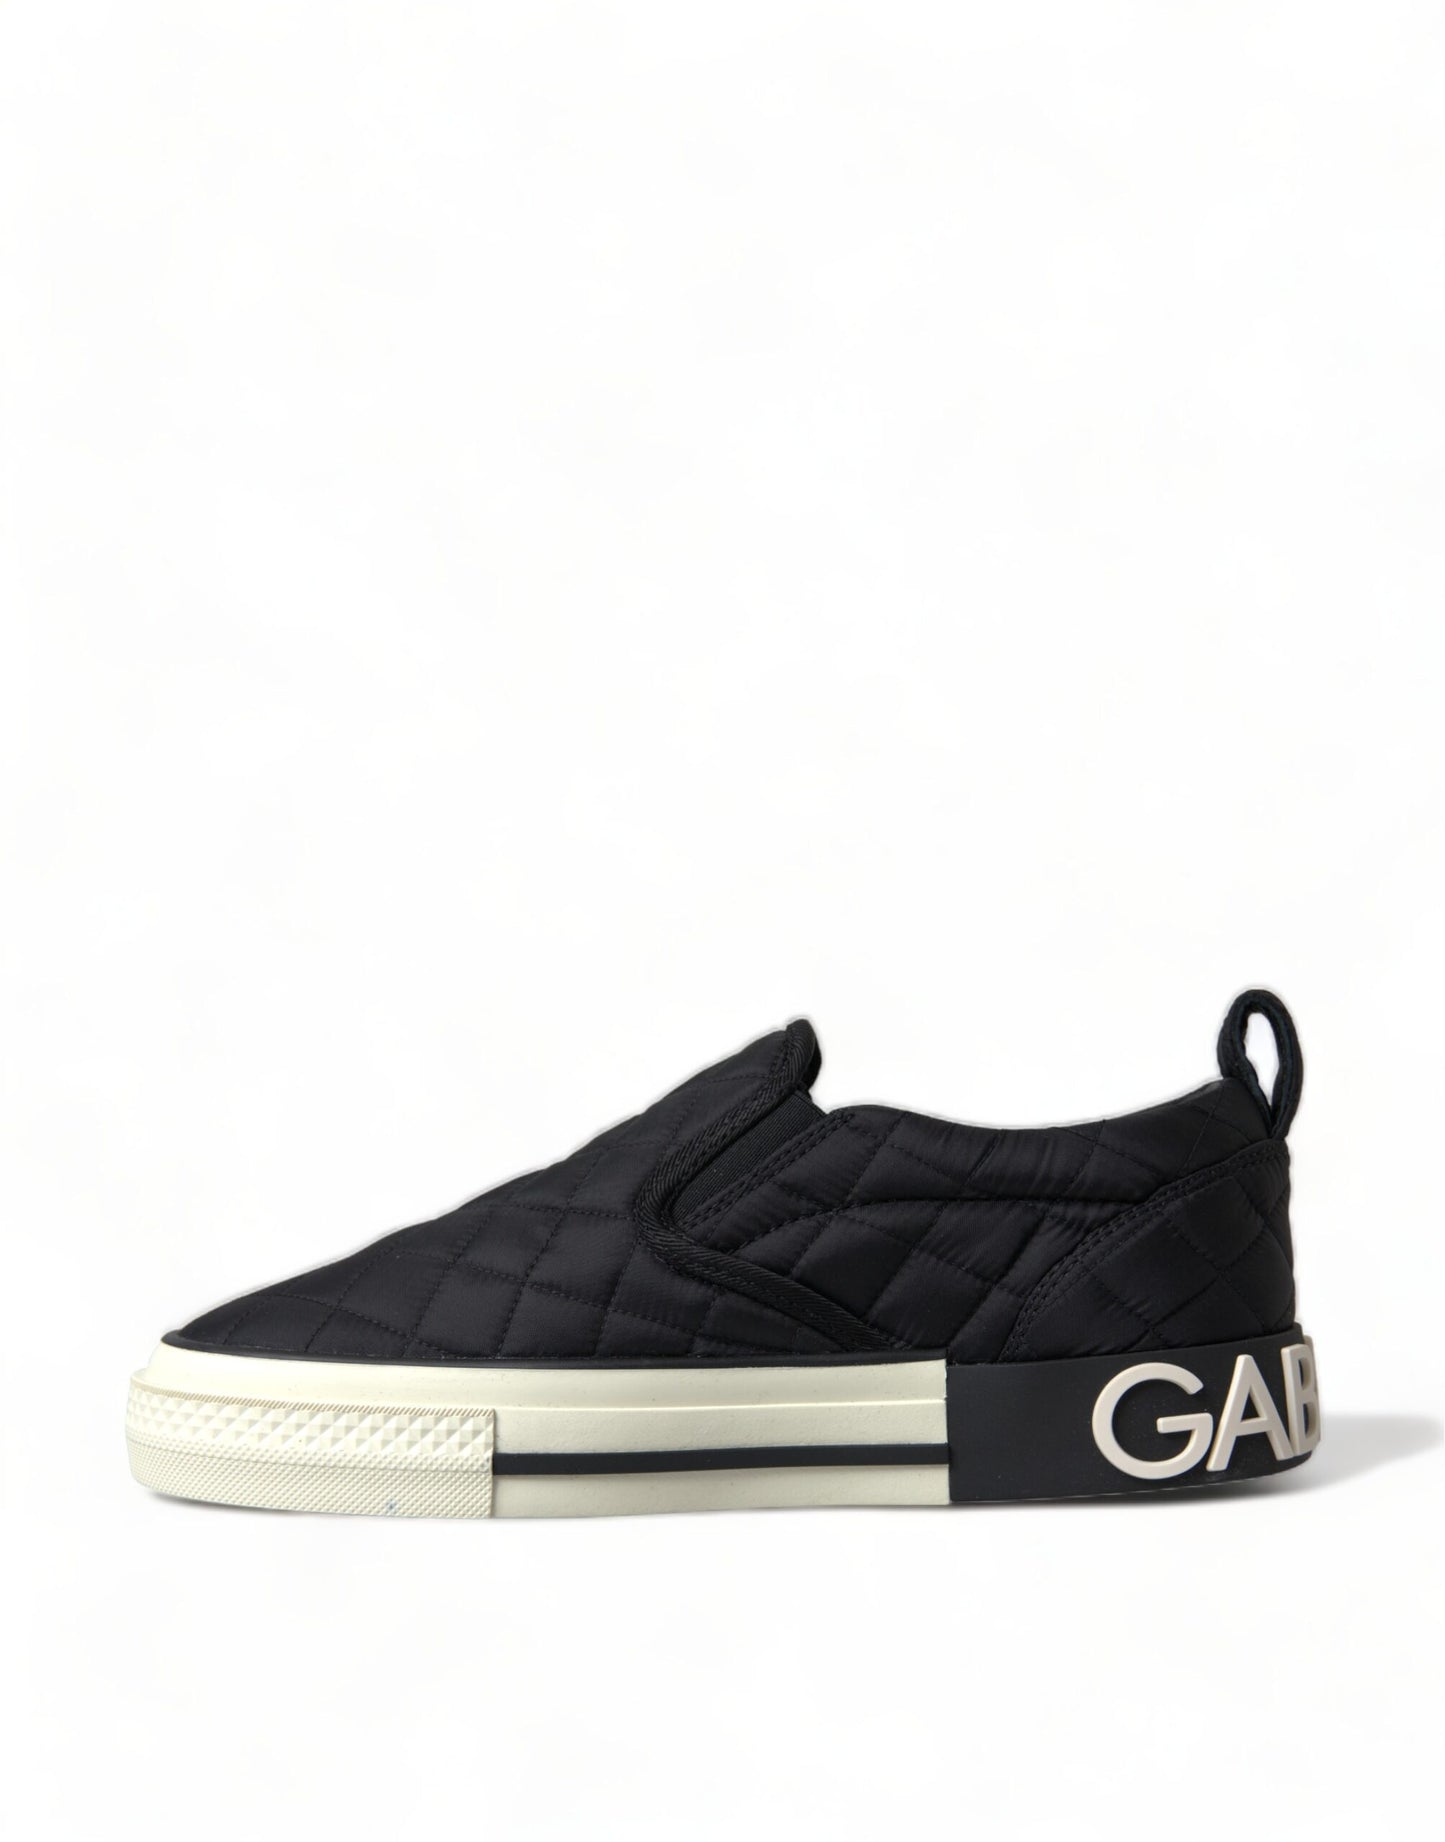 Dolce & Gabbana Elegant Quilted Black Canvas Sneakers